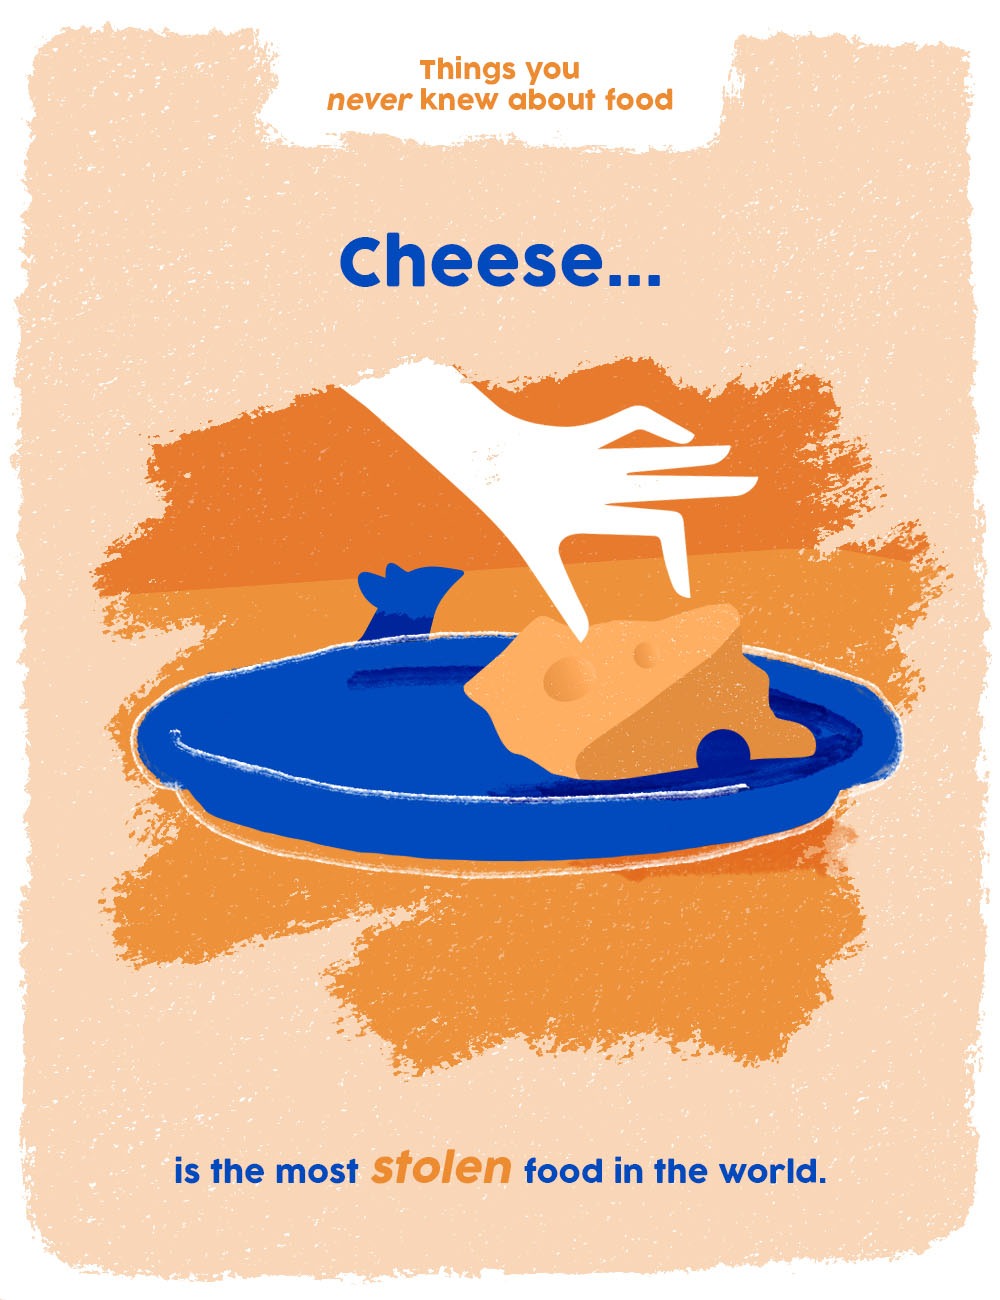 things you never knew about food graphics - cheese facts